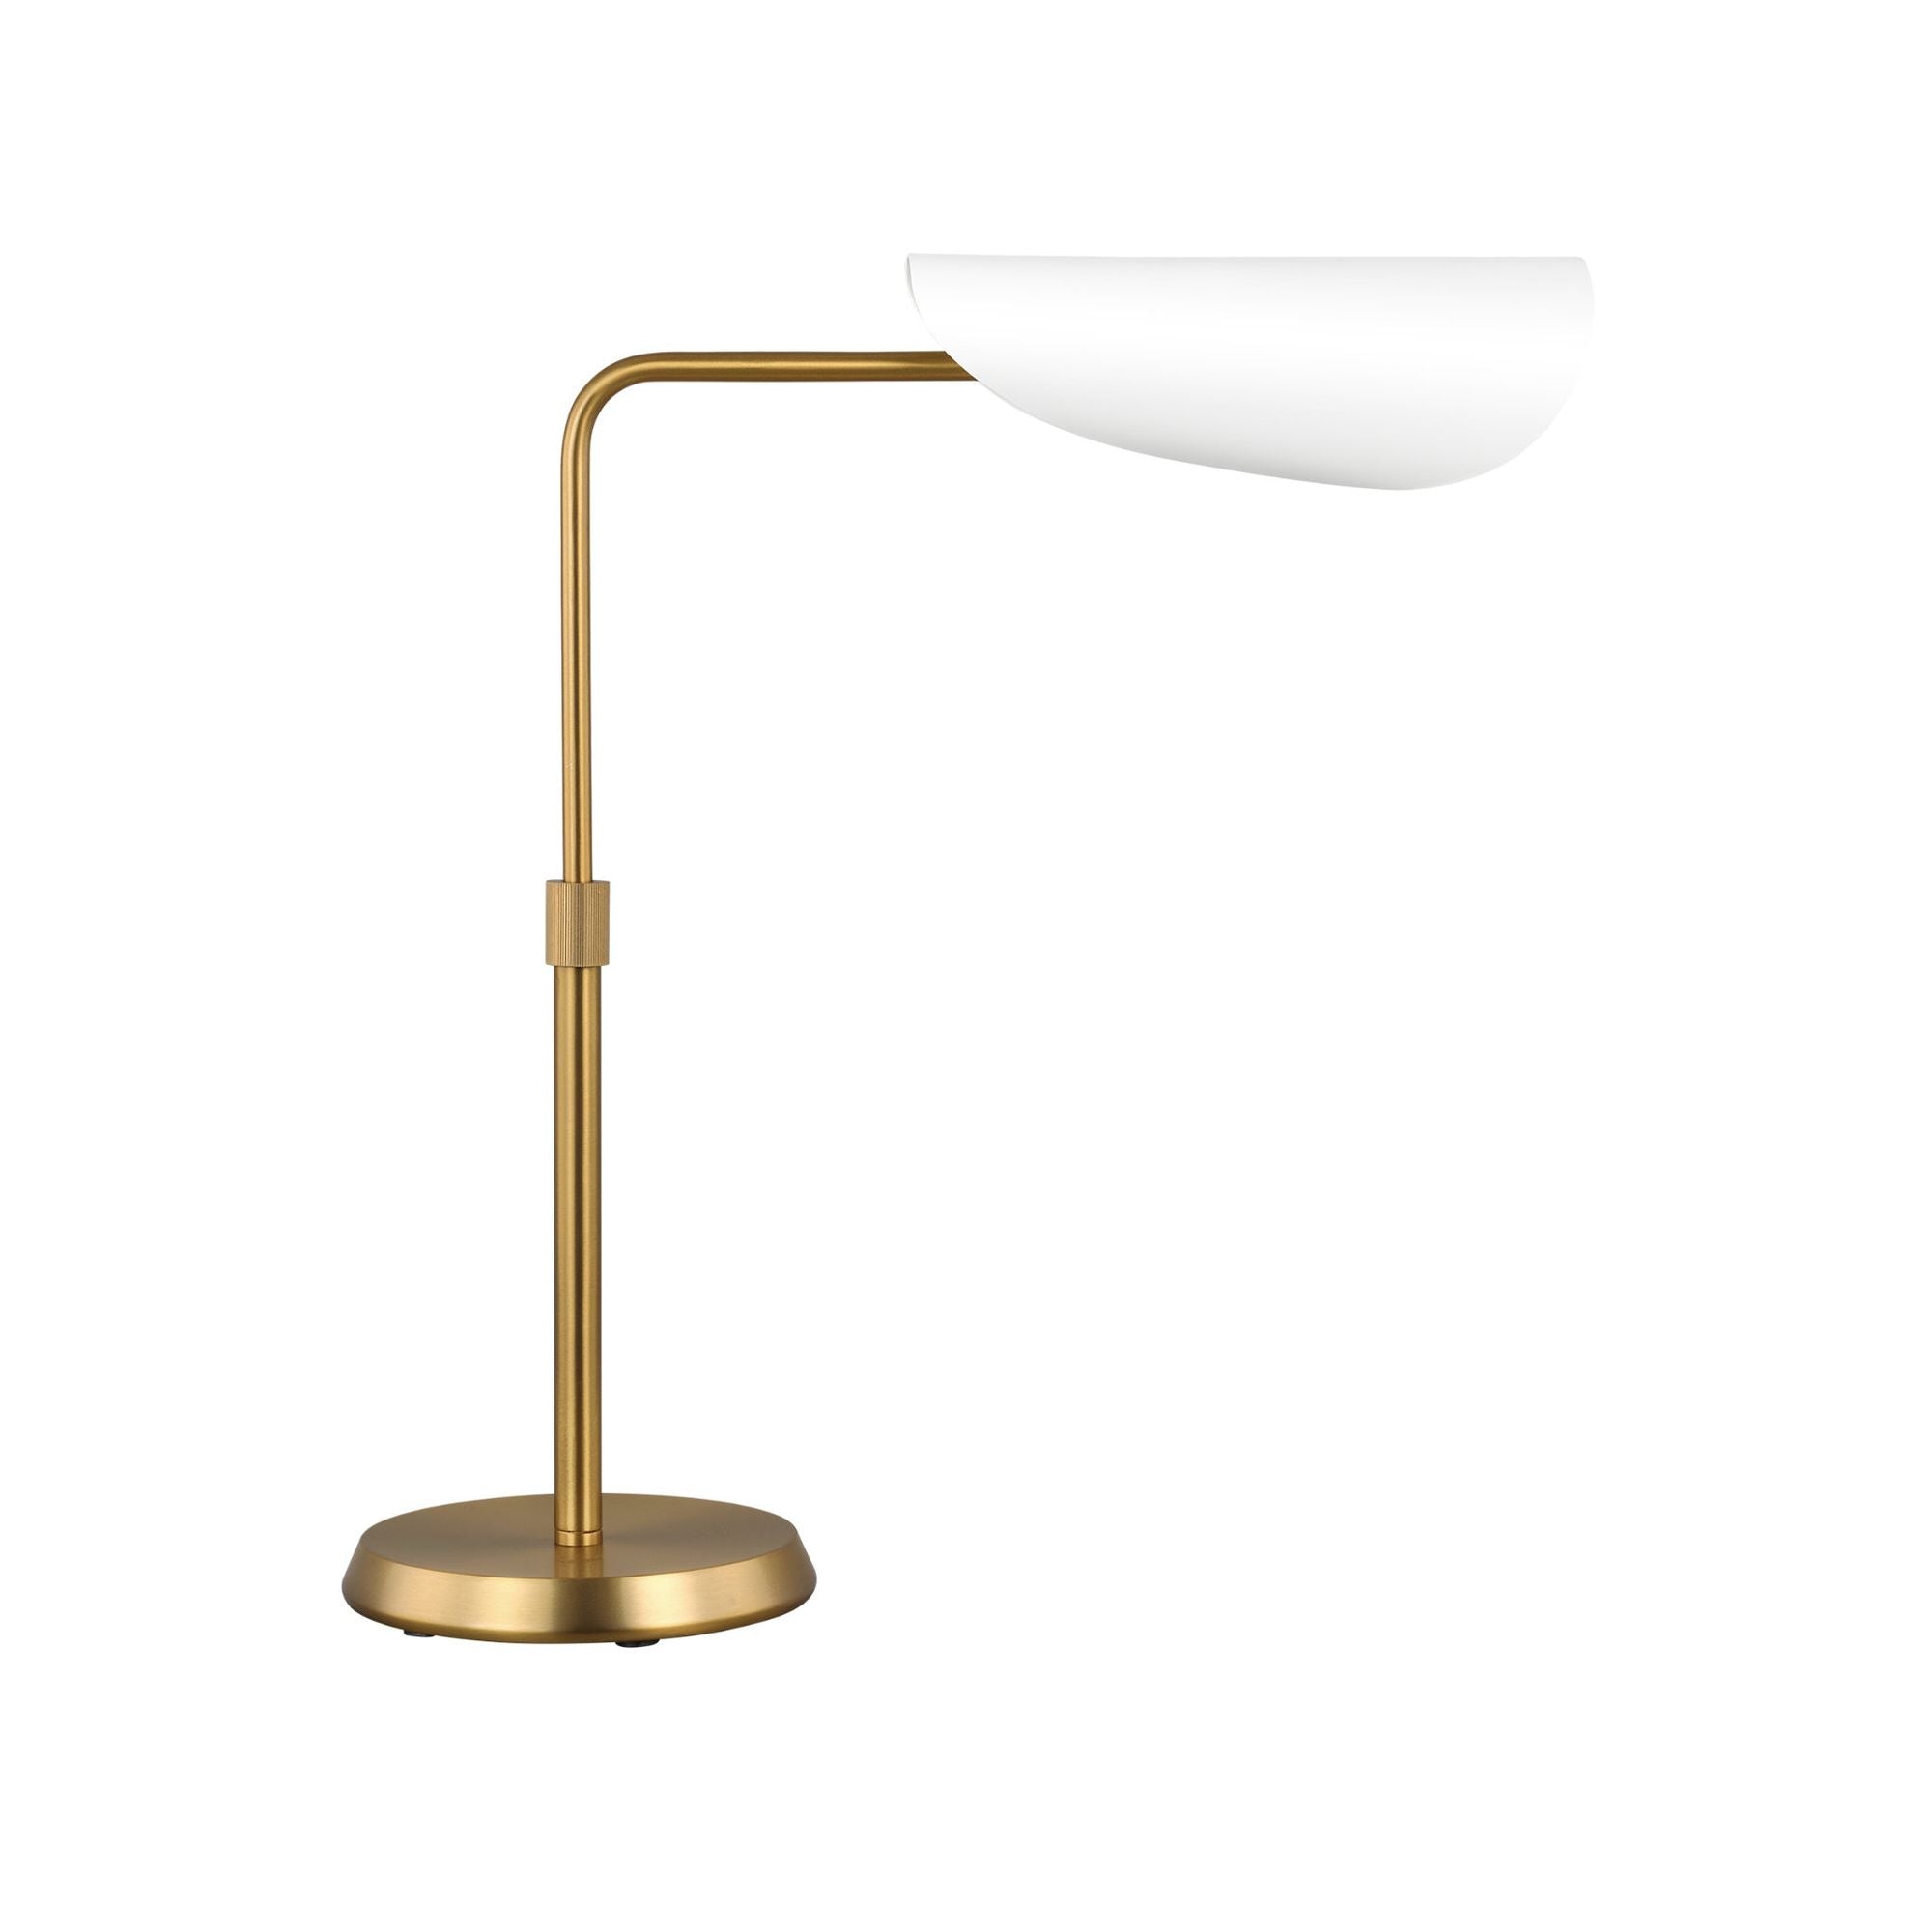 AERIN Tresa Task Table Lamp in Matte White and Burnished Brass